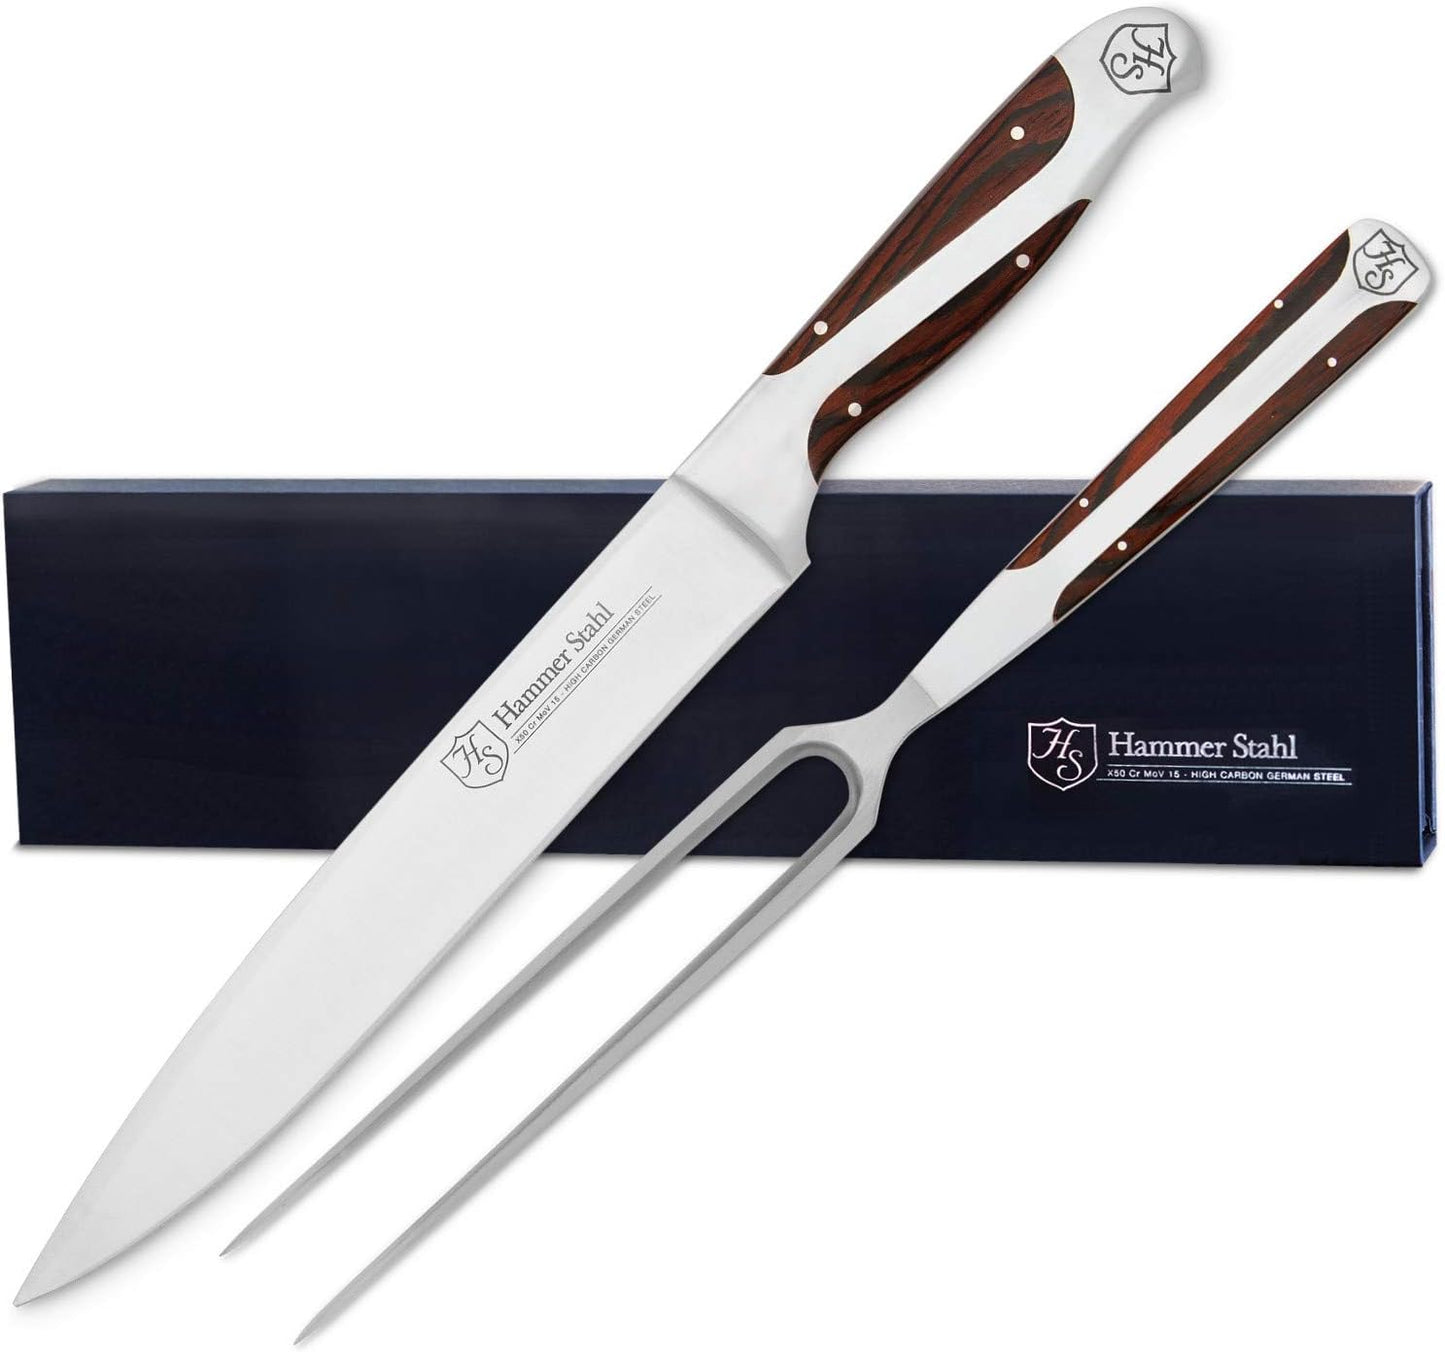 Carving Knife and Fork Set | German Forged High Carbon Stainless Steel Carving Set | Professional Carving Knife for Meat, Turkey & Brisket | Ergonomic Quad-Tang Pakkawood Handle